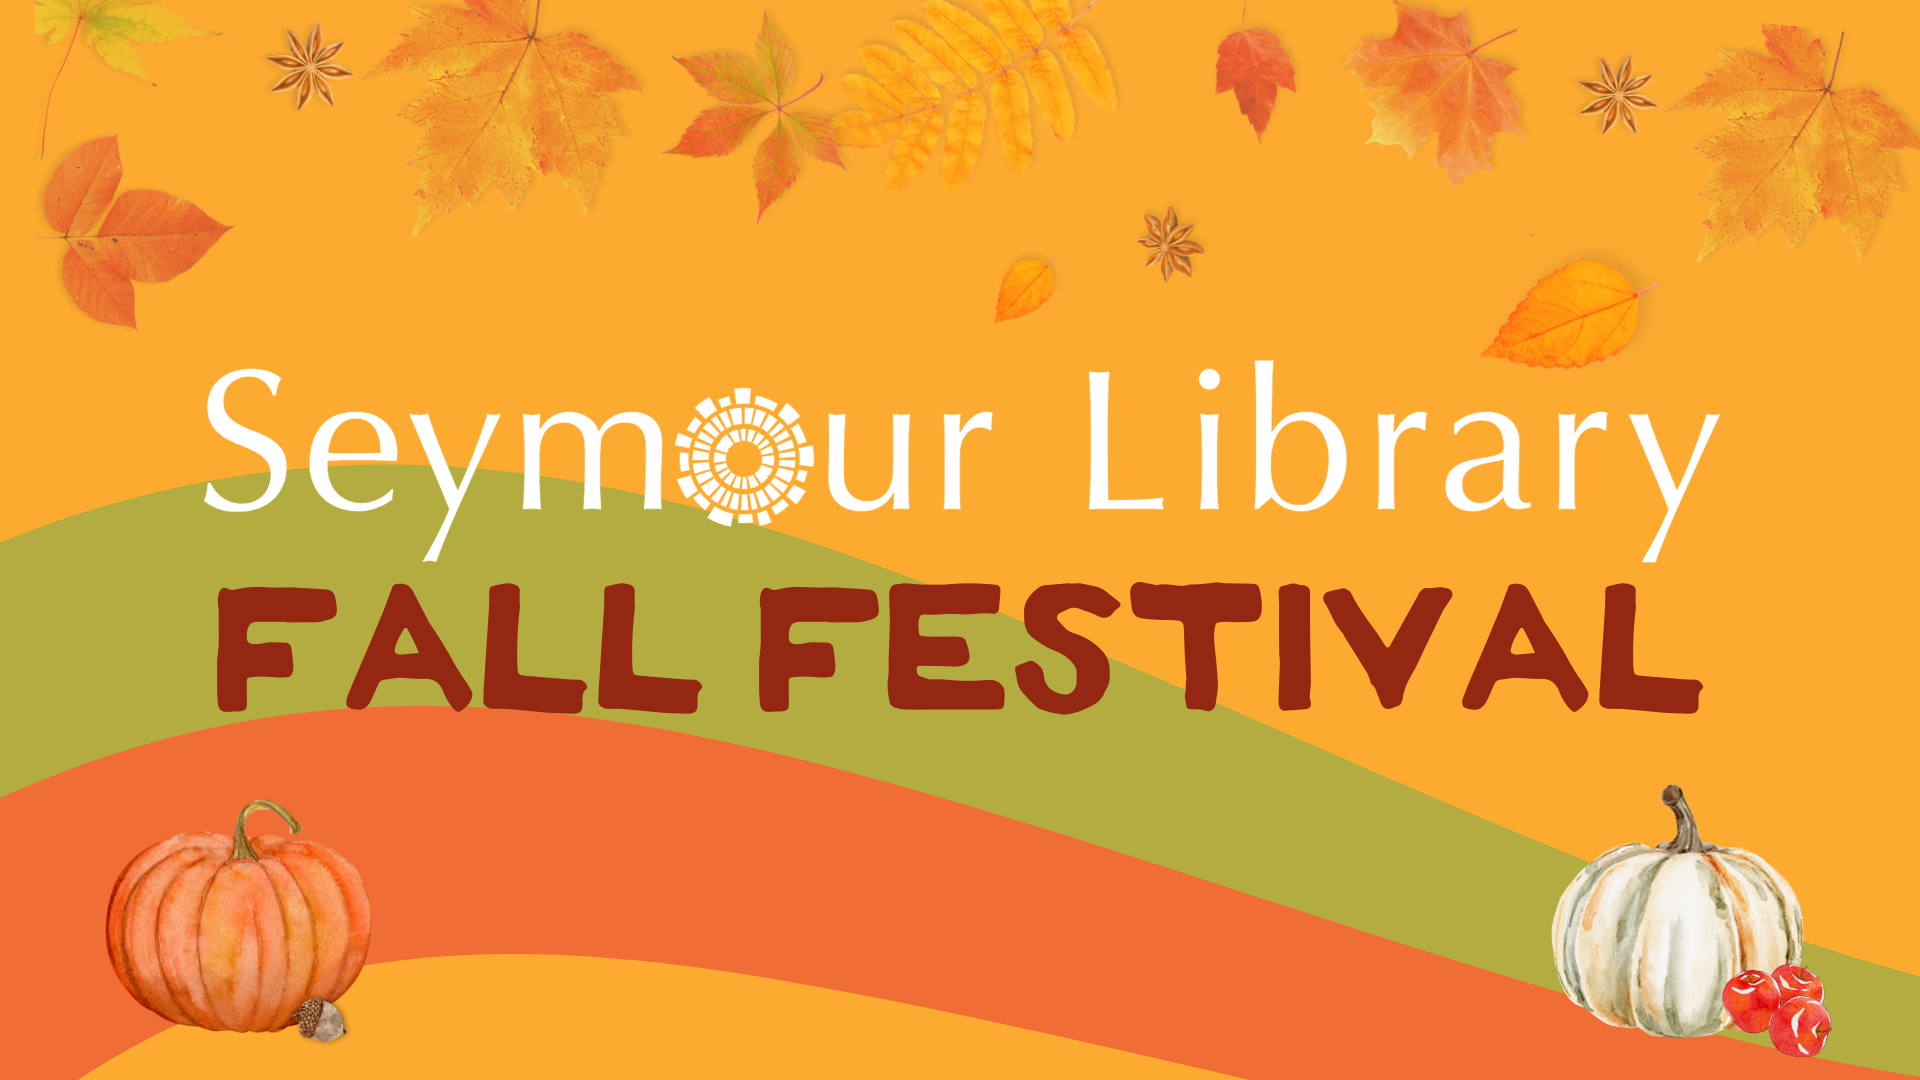 Seymour Library Fall Festival with image of fall leaves and pumpkins.